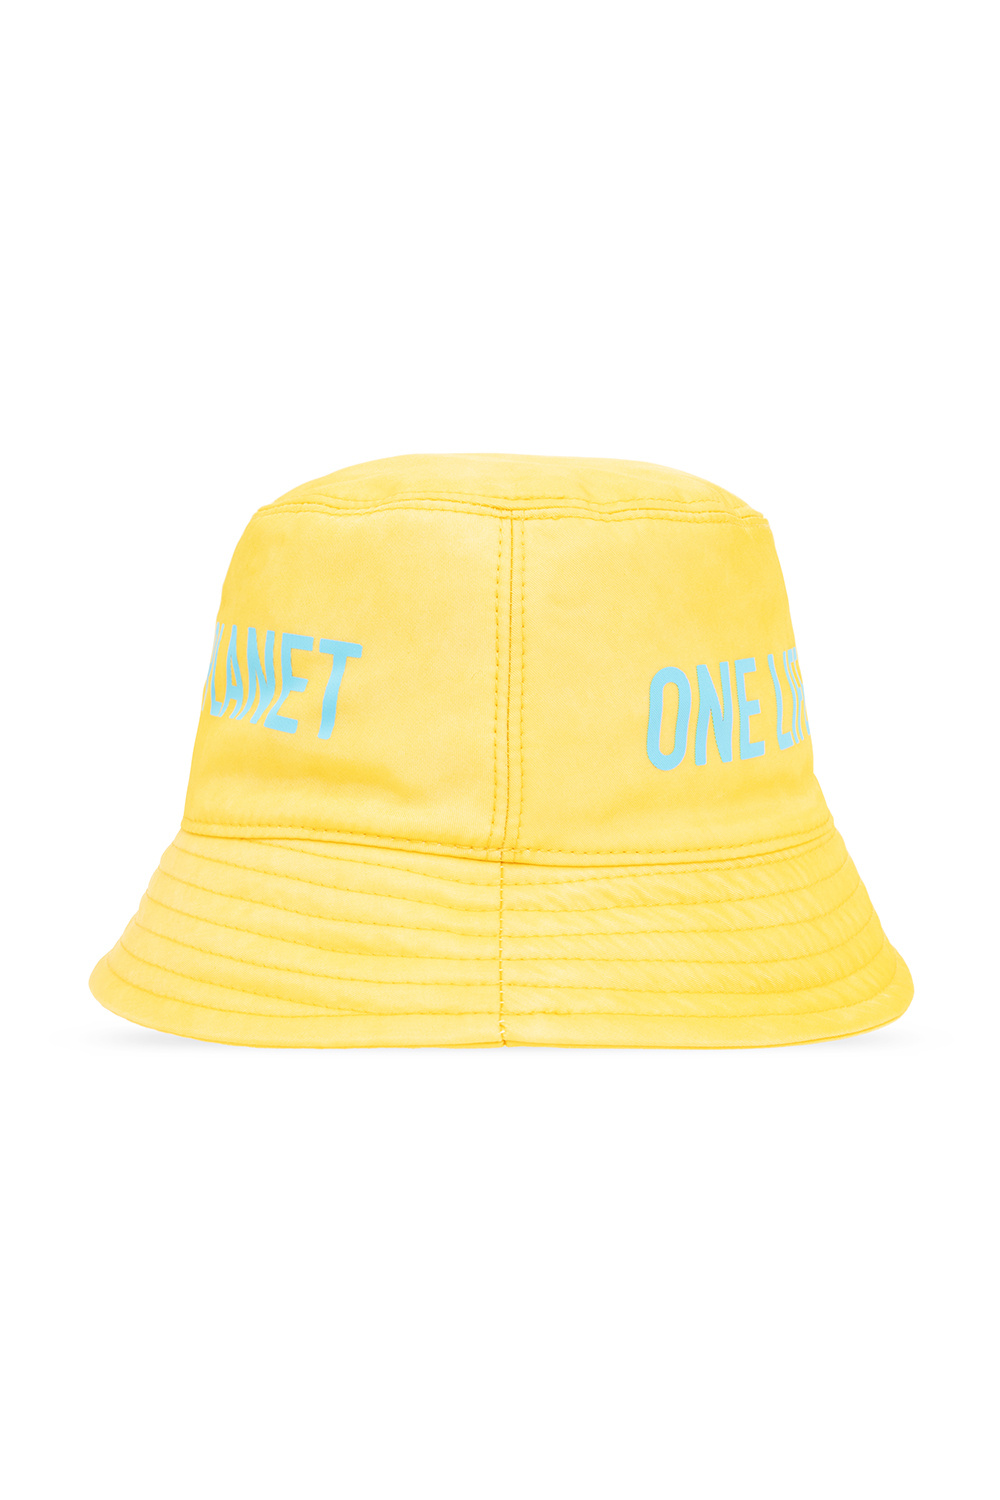 Dsquared2 ‘One Life One Planet’ collection bucket Schauspielern hat